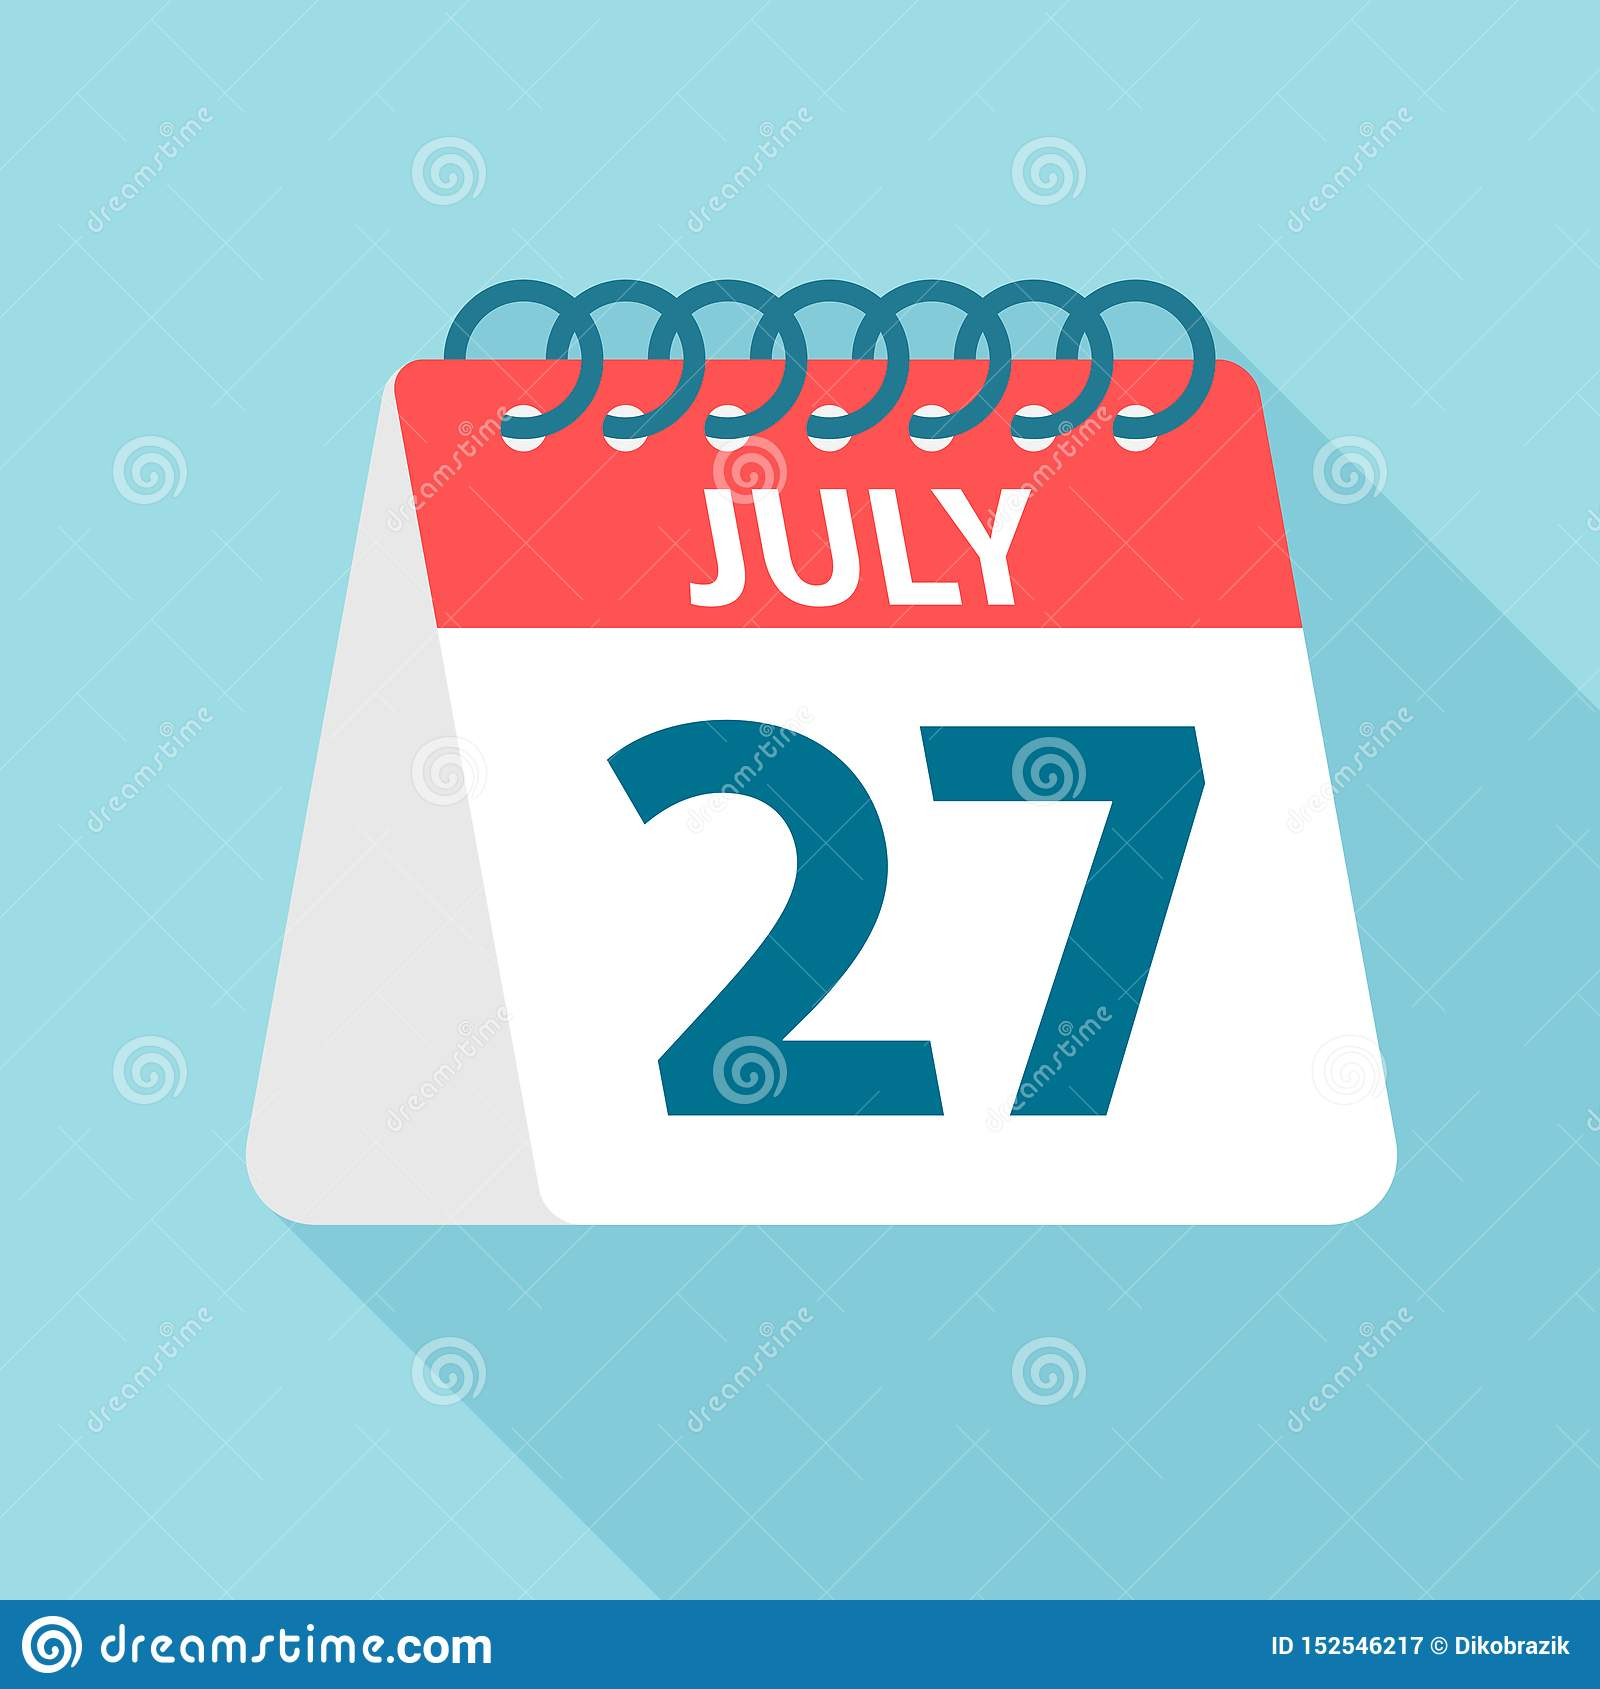 July 27 - Calendar Icon. Vector Illustration Of One Day Of